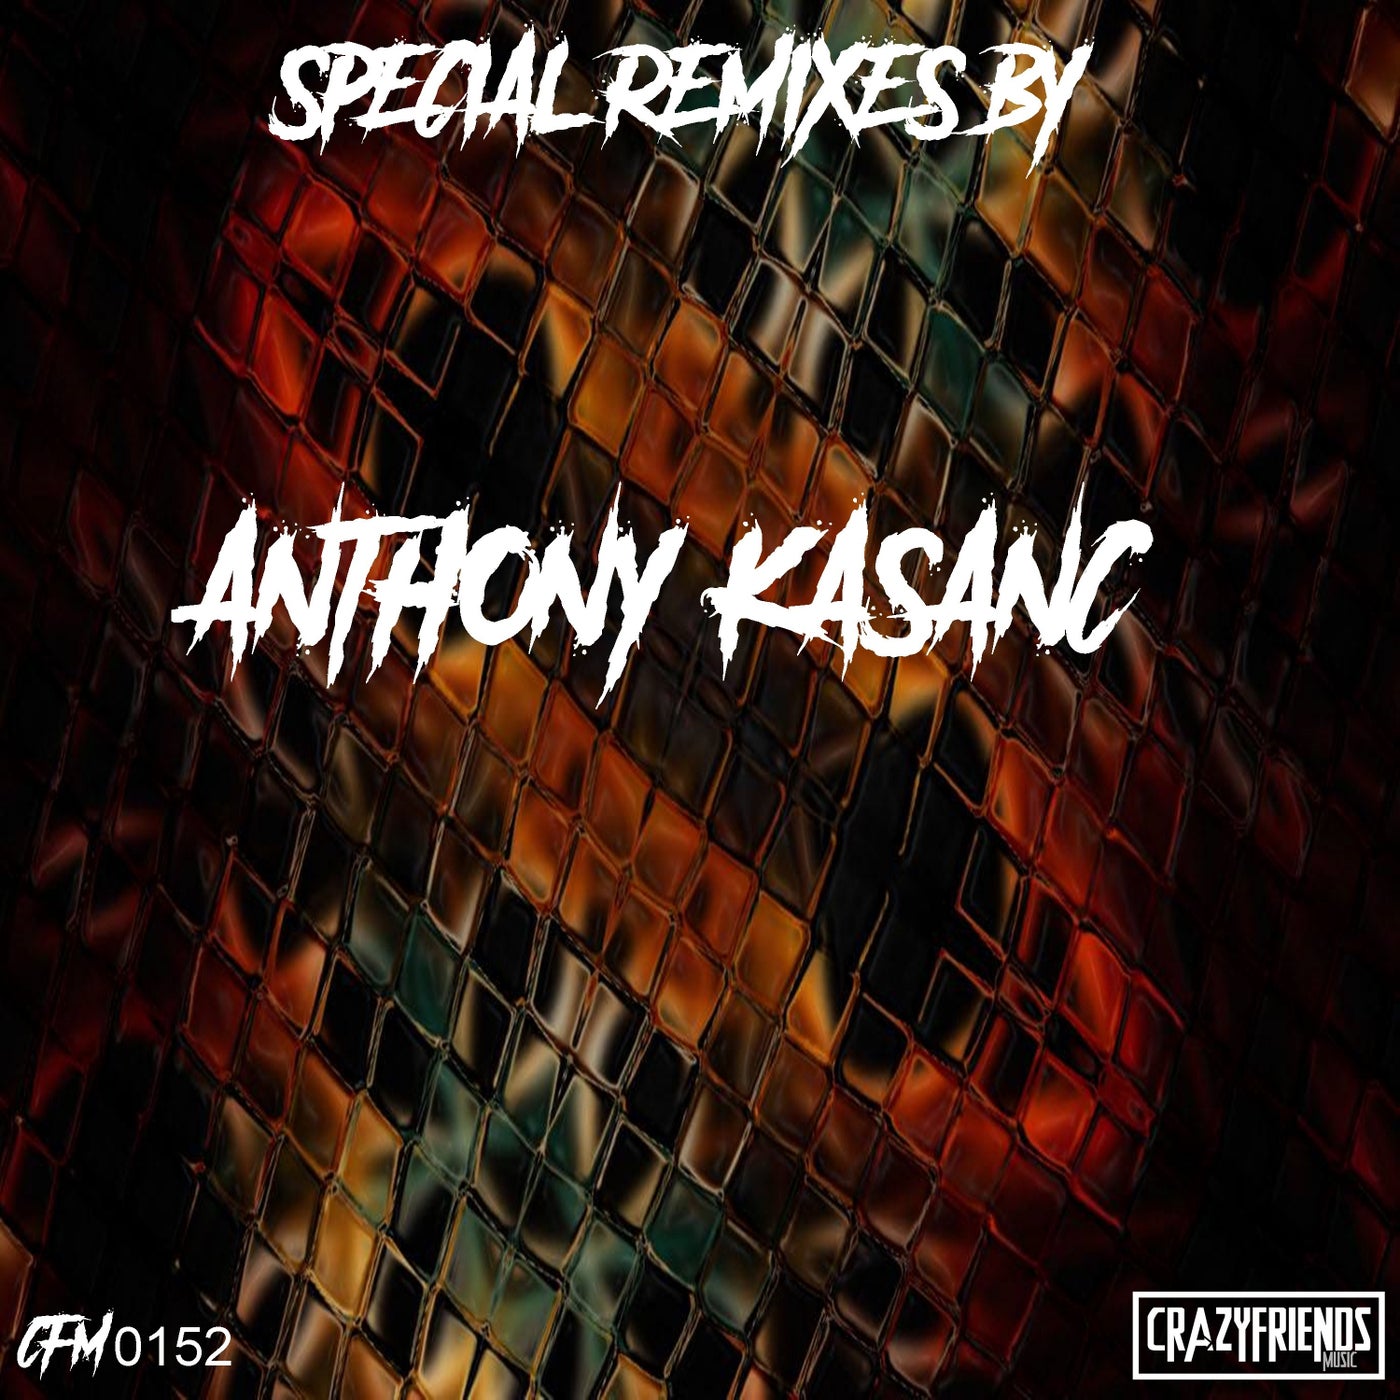 SPECIAL REMIXES BY ANTHONY KASANC